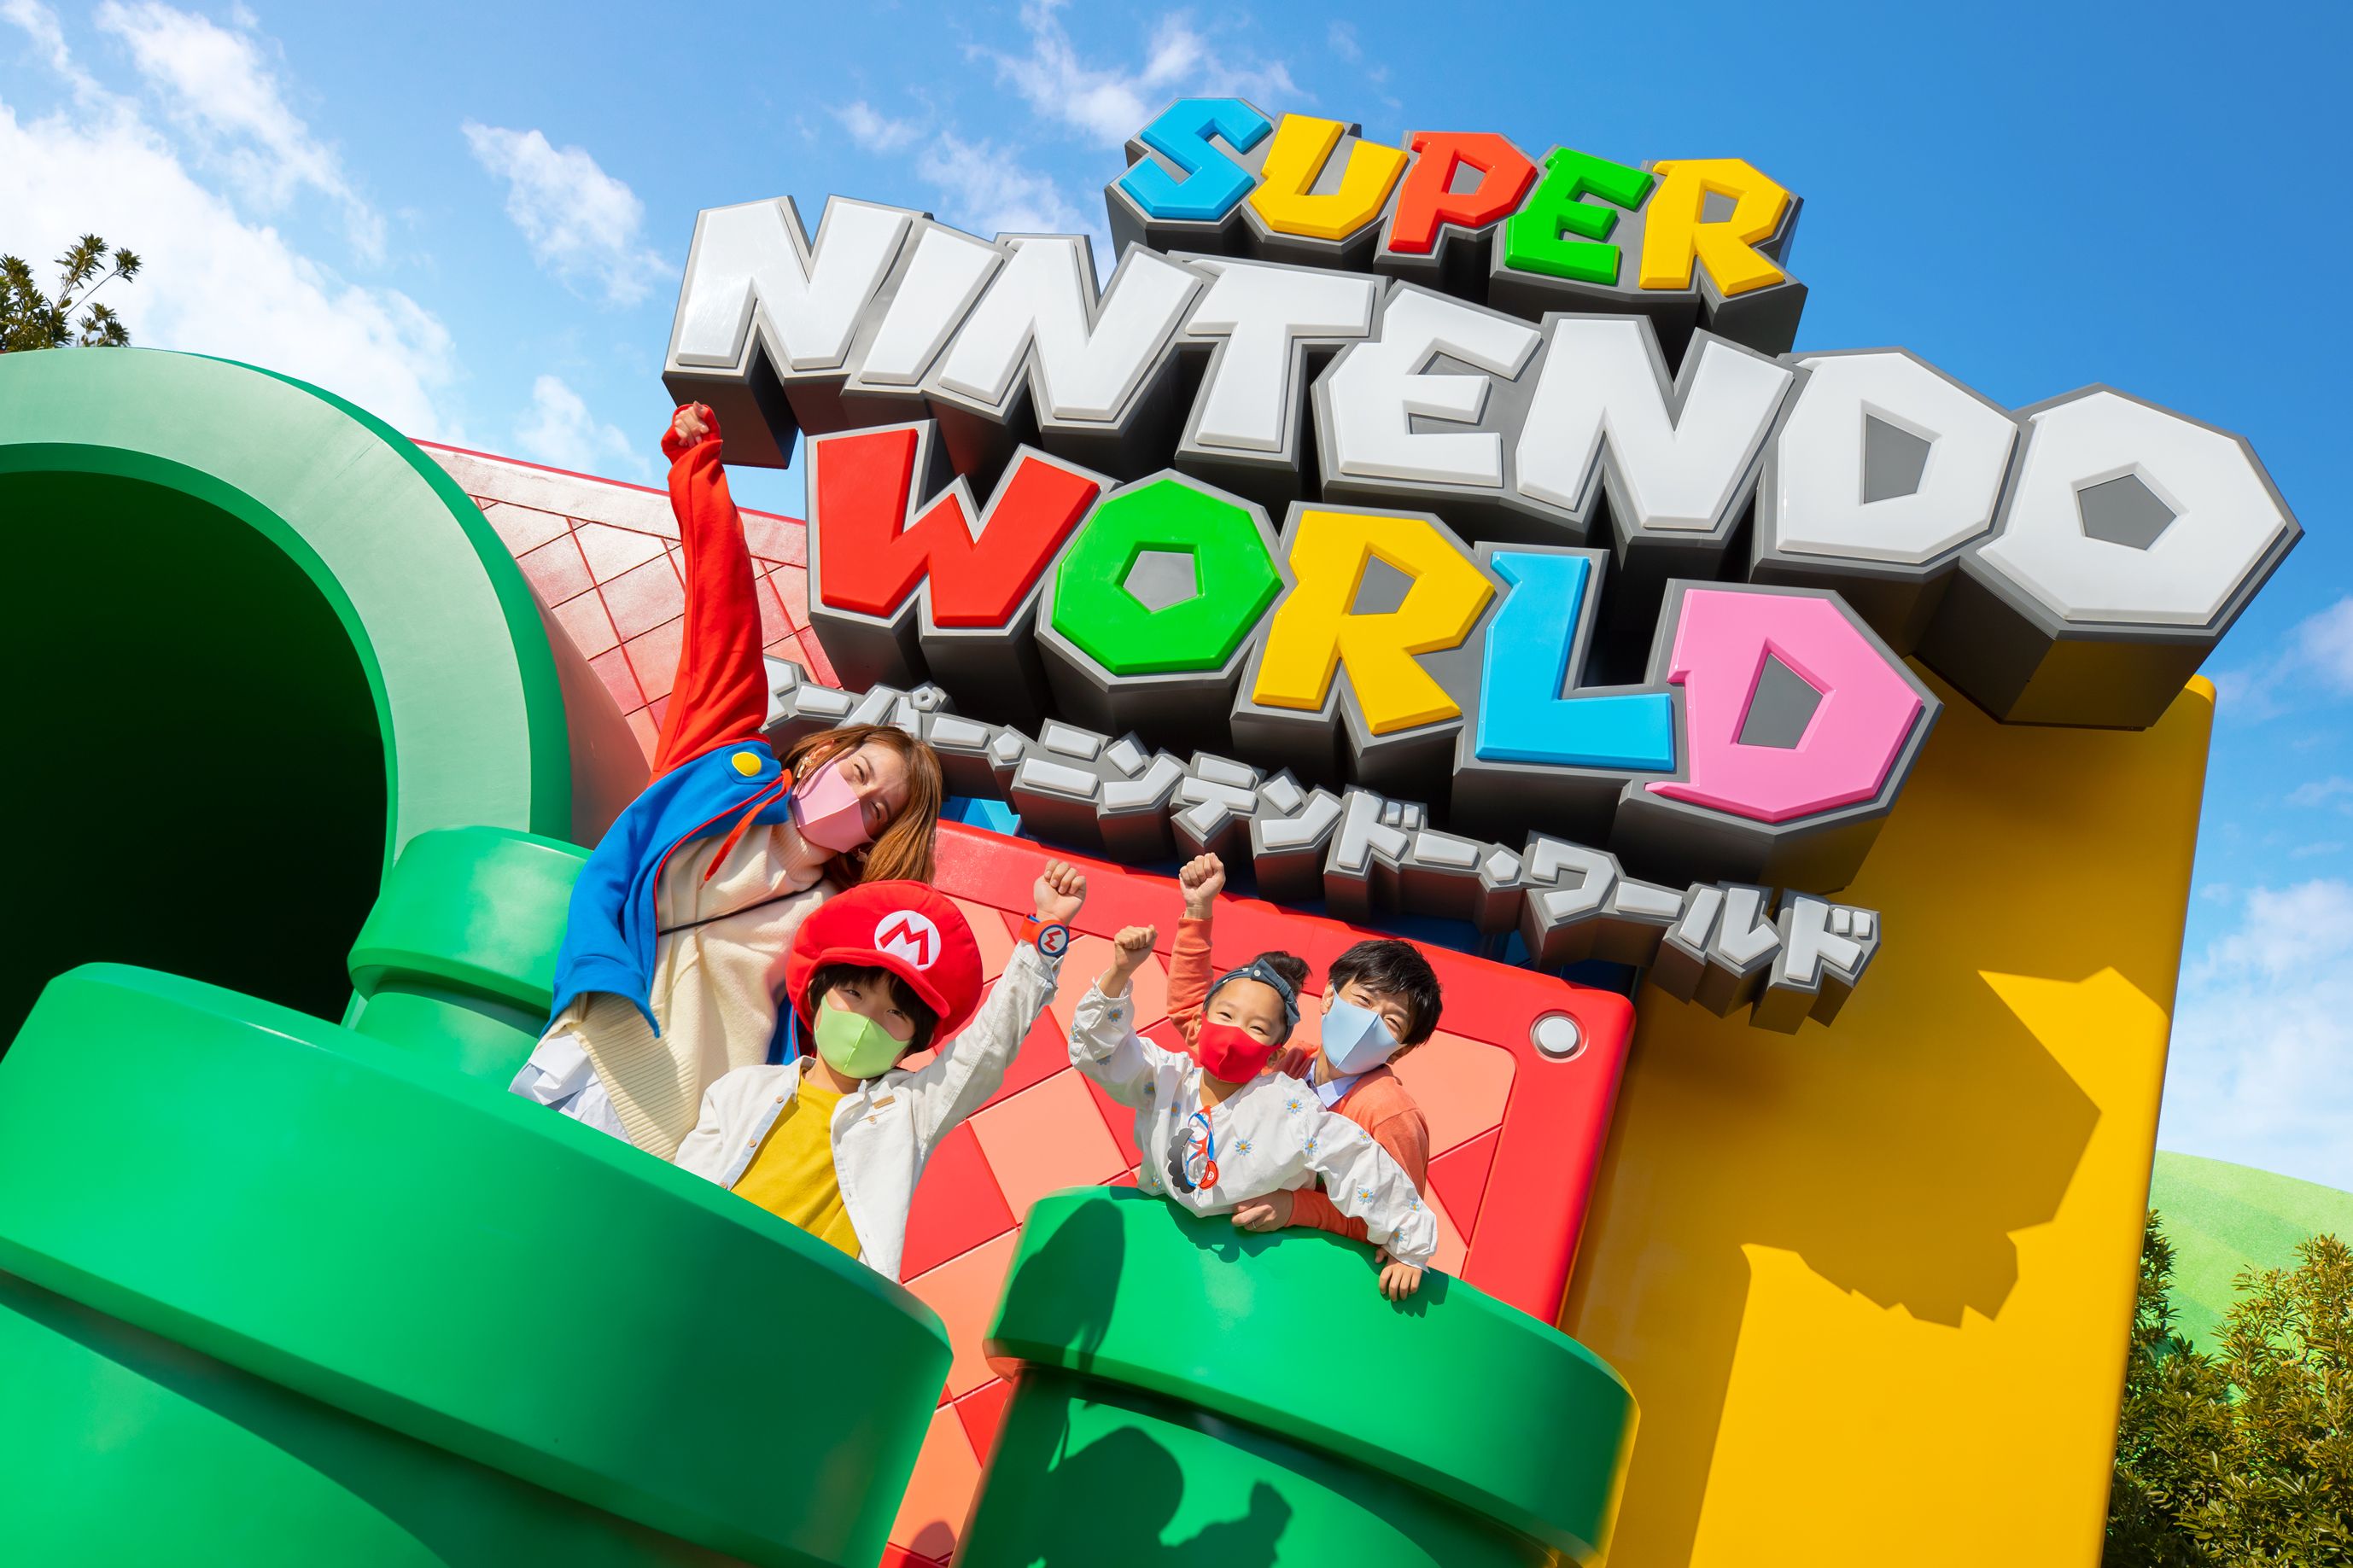 SUPER NINTENDO WORLD Opens at Universal Studios Hollywood on Friday,  February 17, 2023 - News - Nintendo Official Site